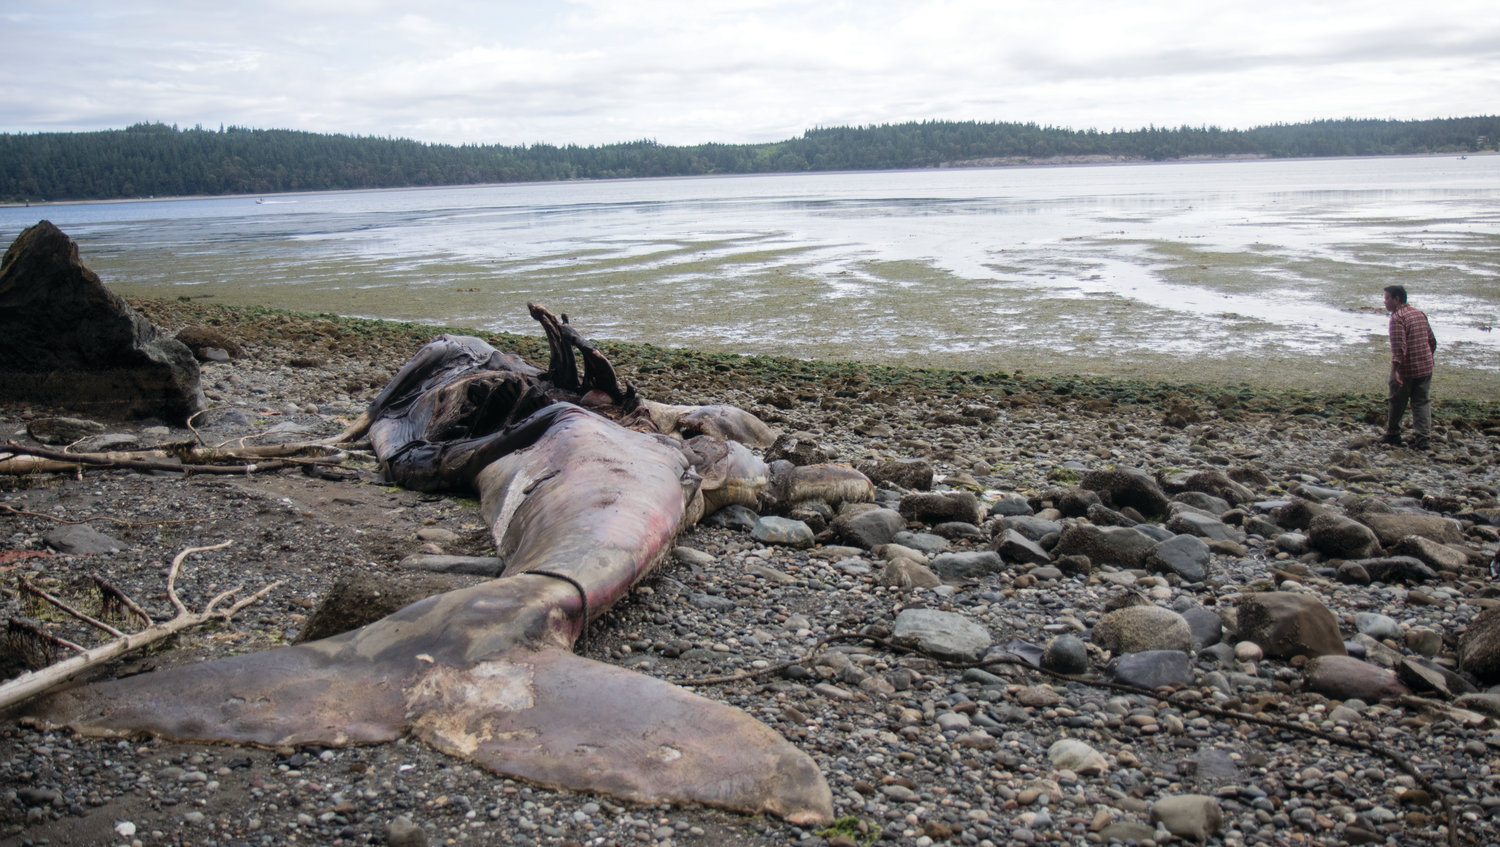 The male gray whale washed up in Mats Mats Bay three weeks ago. It had eelgrass and plastic in its stomach, an indication of starvation as the cause of death. Marine biologists don’t know what has led to increased rates of gray whales washing up on shore up and down the Pacific Coast.